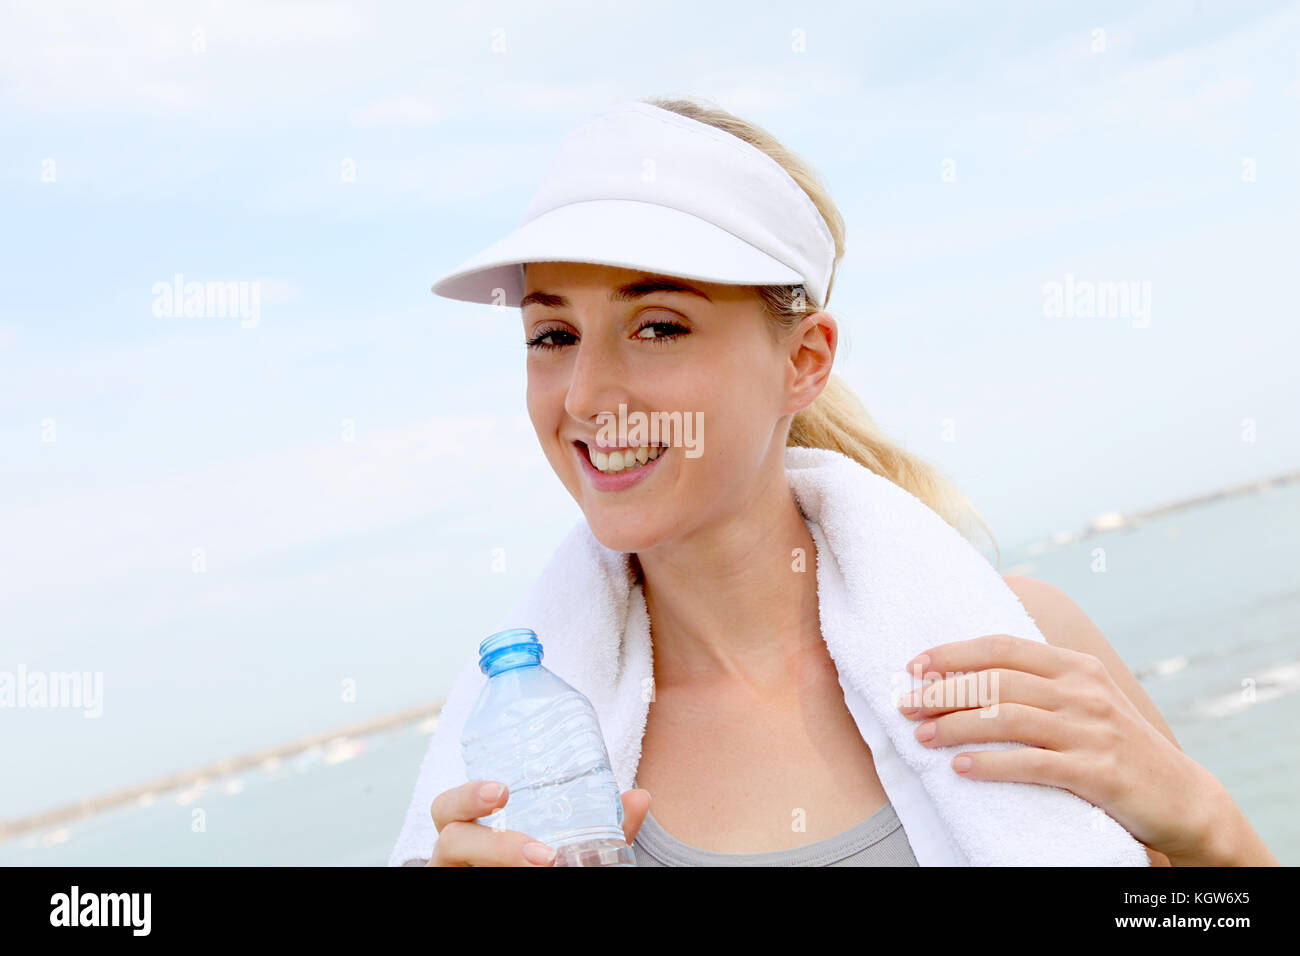 Portrait of jogger drinking water Stock Photo